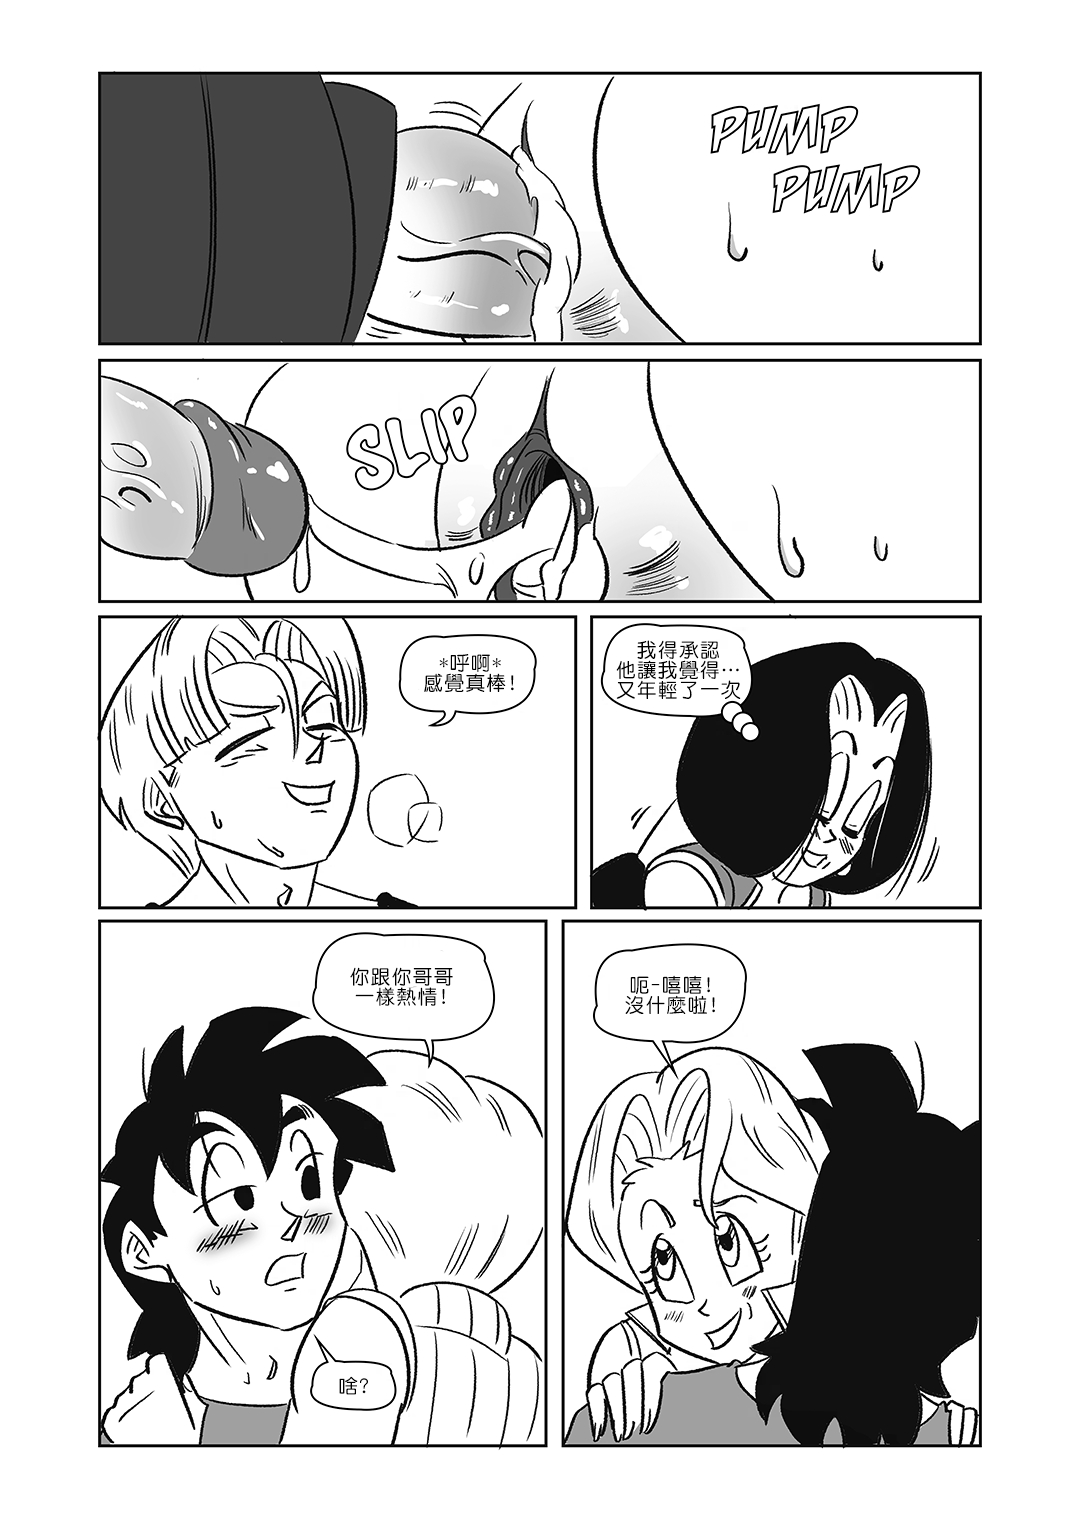 [Funsexydragonball] The Switch Up  (Dragon Ball Z)[Chinese] 24